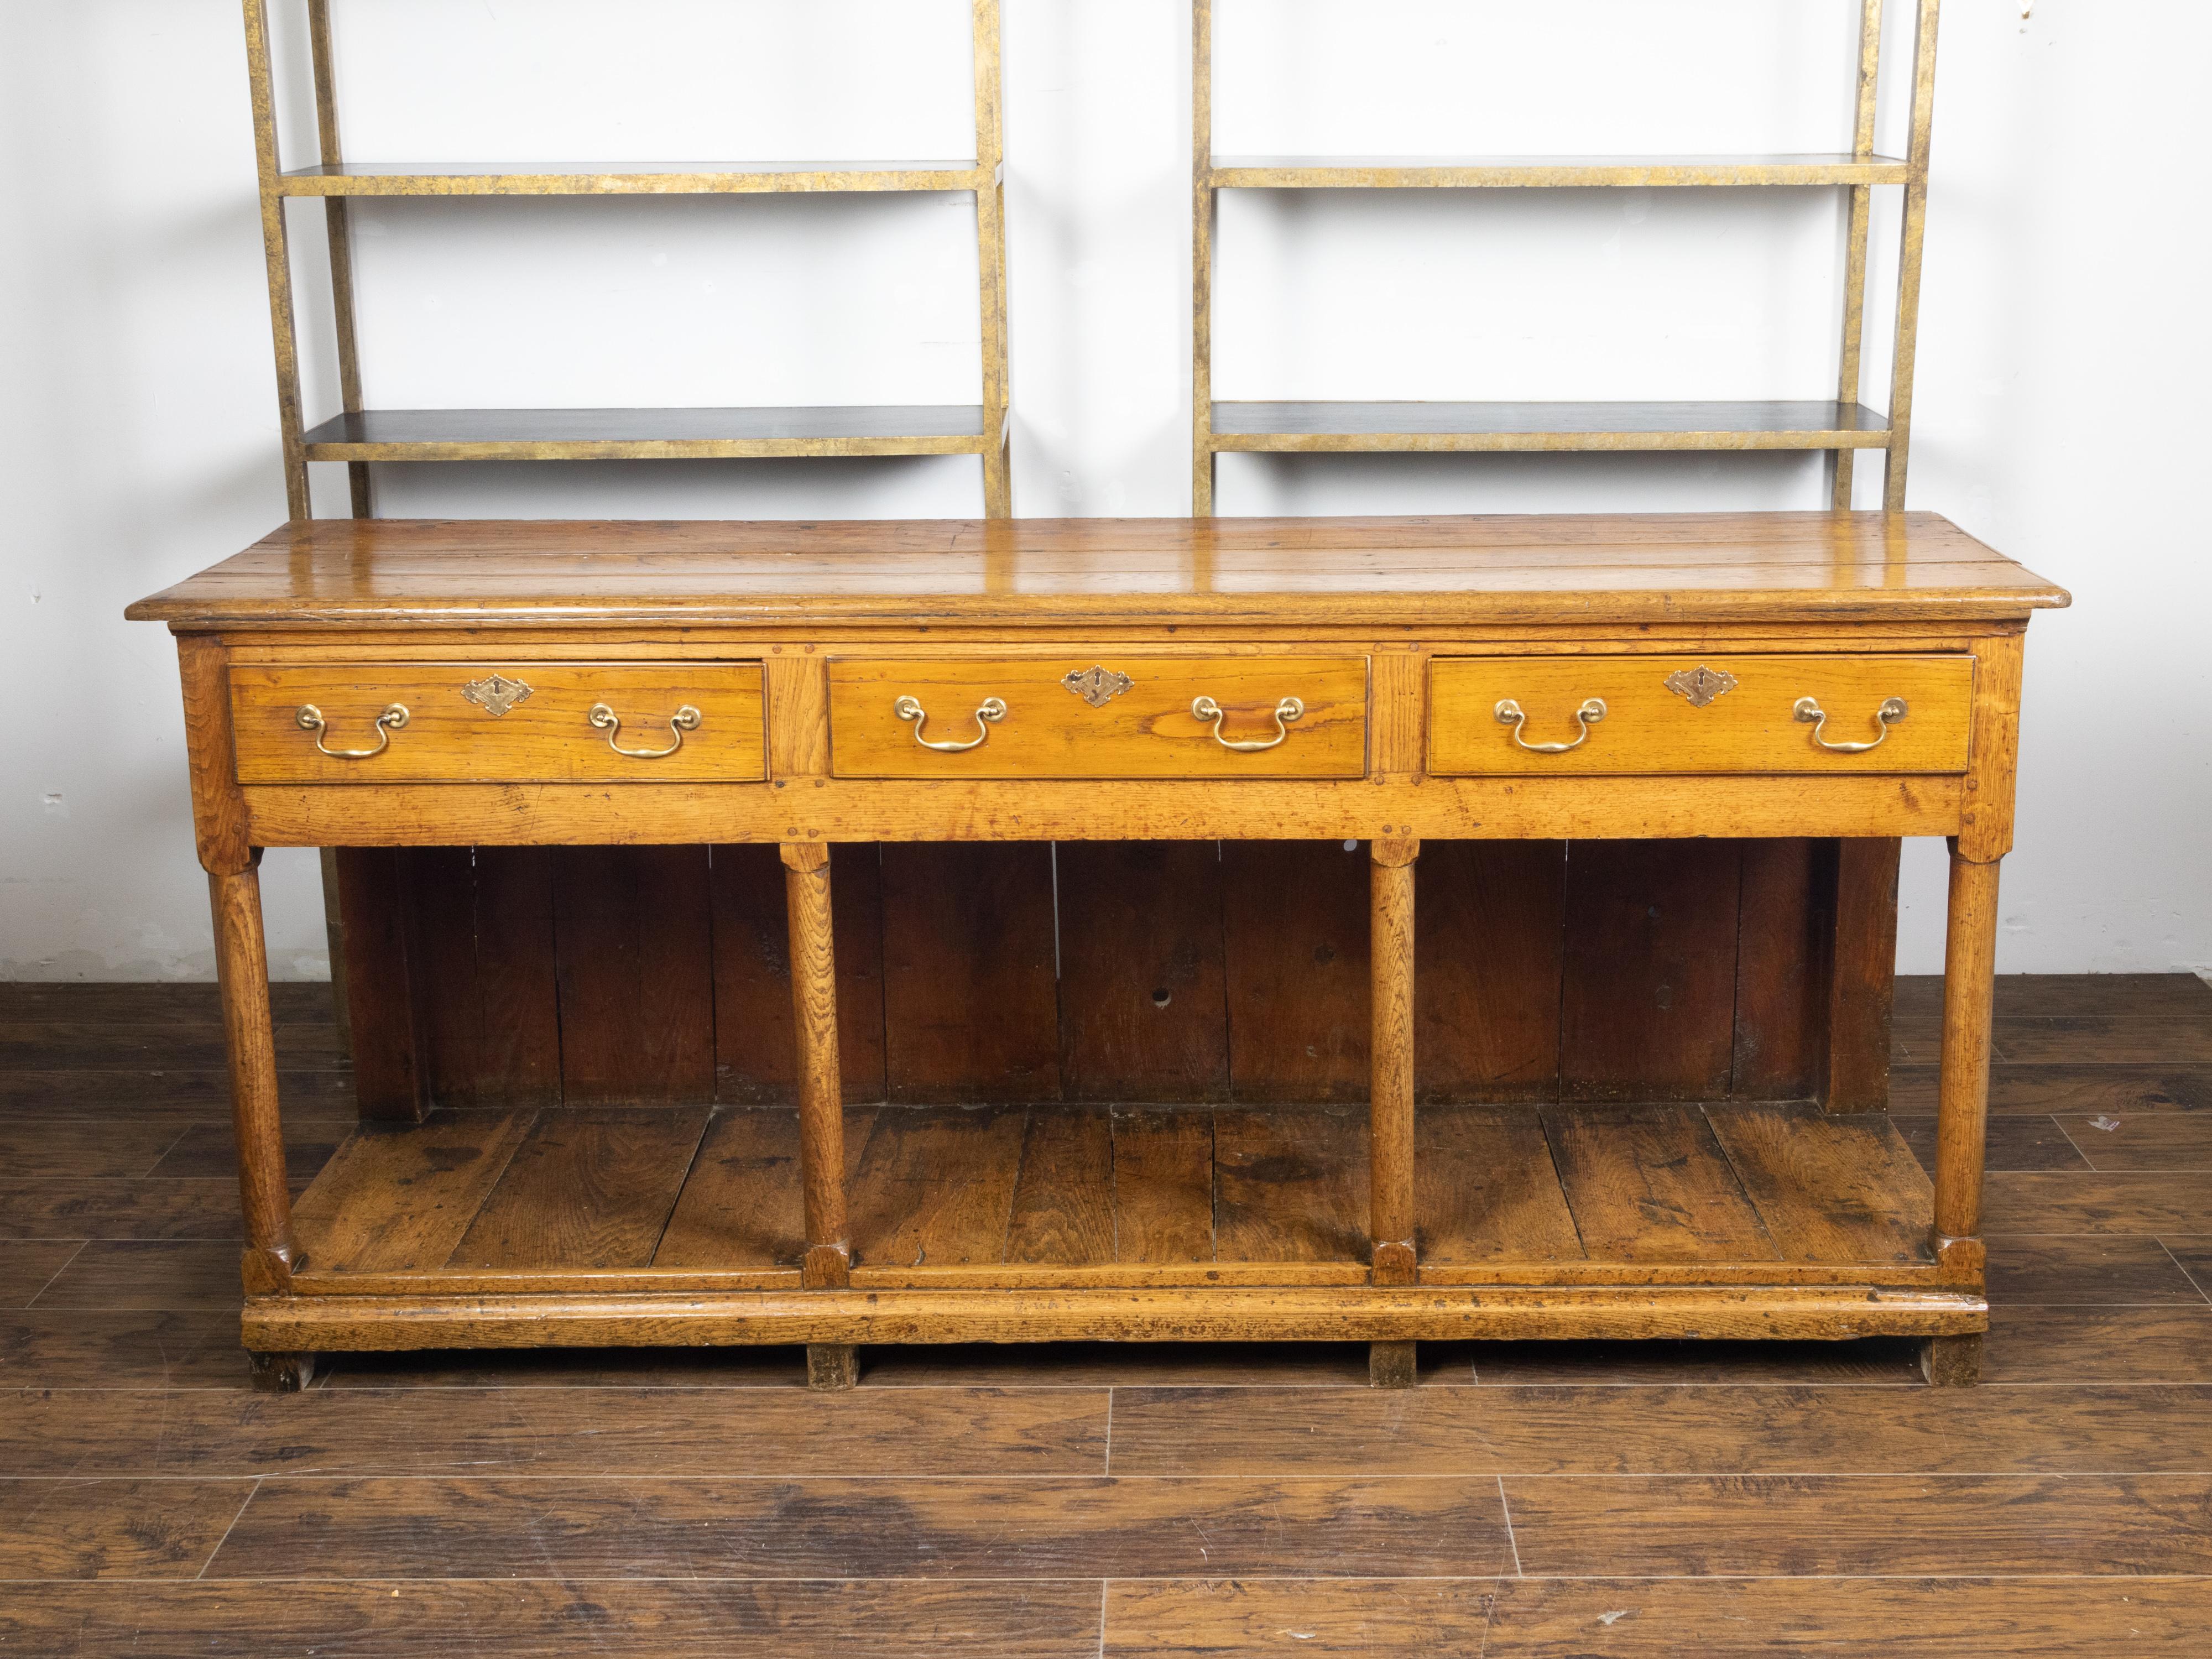 An English Georgian period dresser base from the early 19th century, with three drawers and pot board shelf. Created in England during the first quarter of the 19th century, this wooden dresser base features a rectangular planked top sitting above